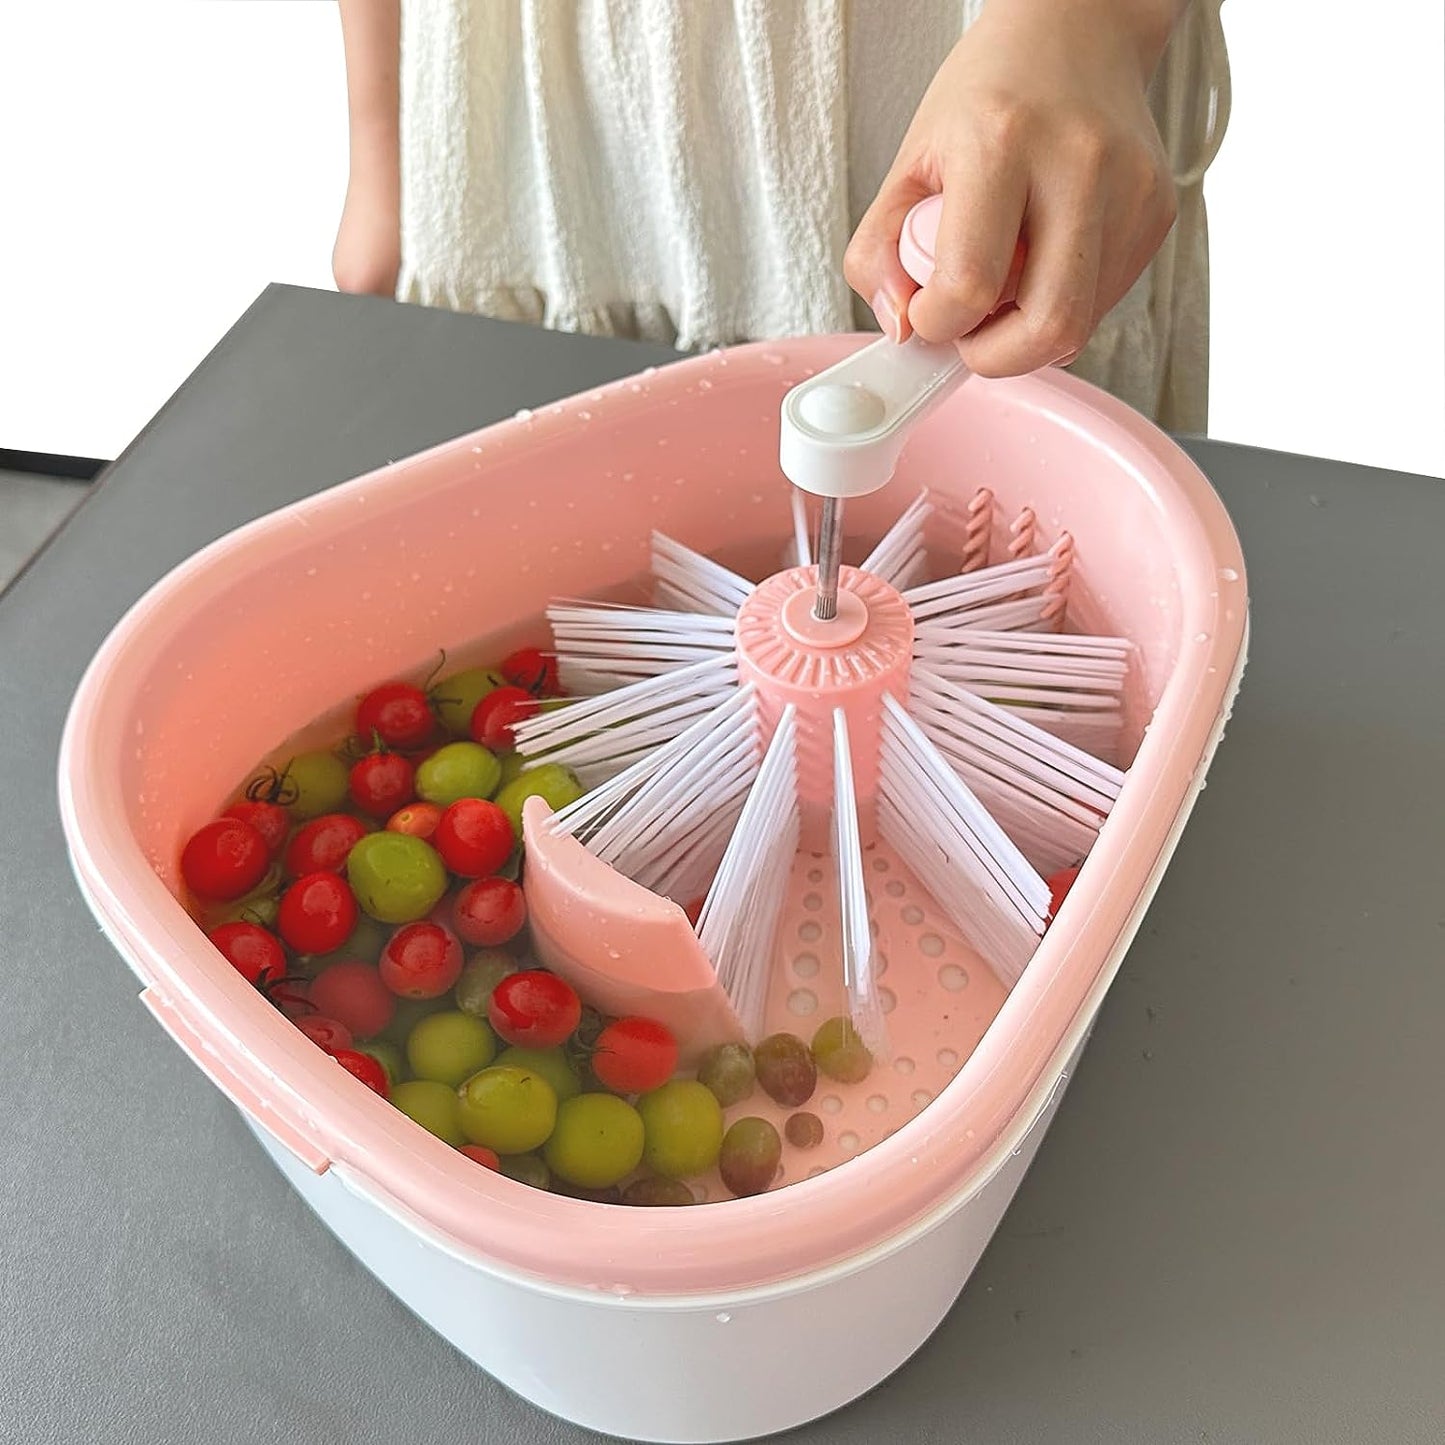 Fruit Cleaner Device, Fruit and Vegetable Washing Machine with Lid, Fruit Washer Spinner with Brush, Portable Fruit Scrubber, 720 Degree Scrubbing Fruit